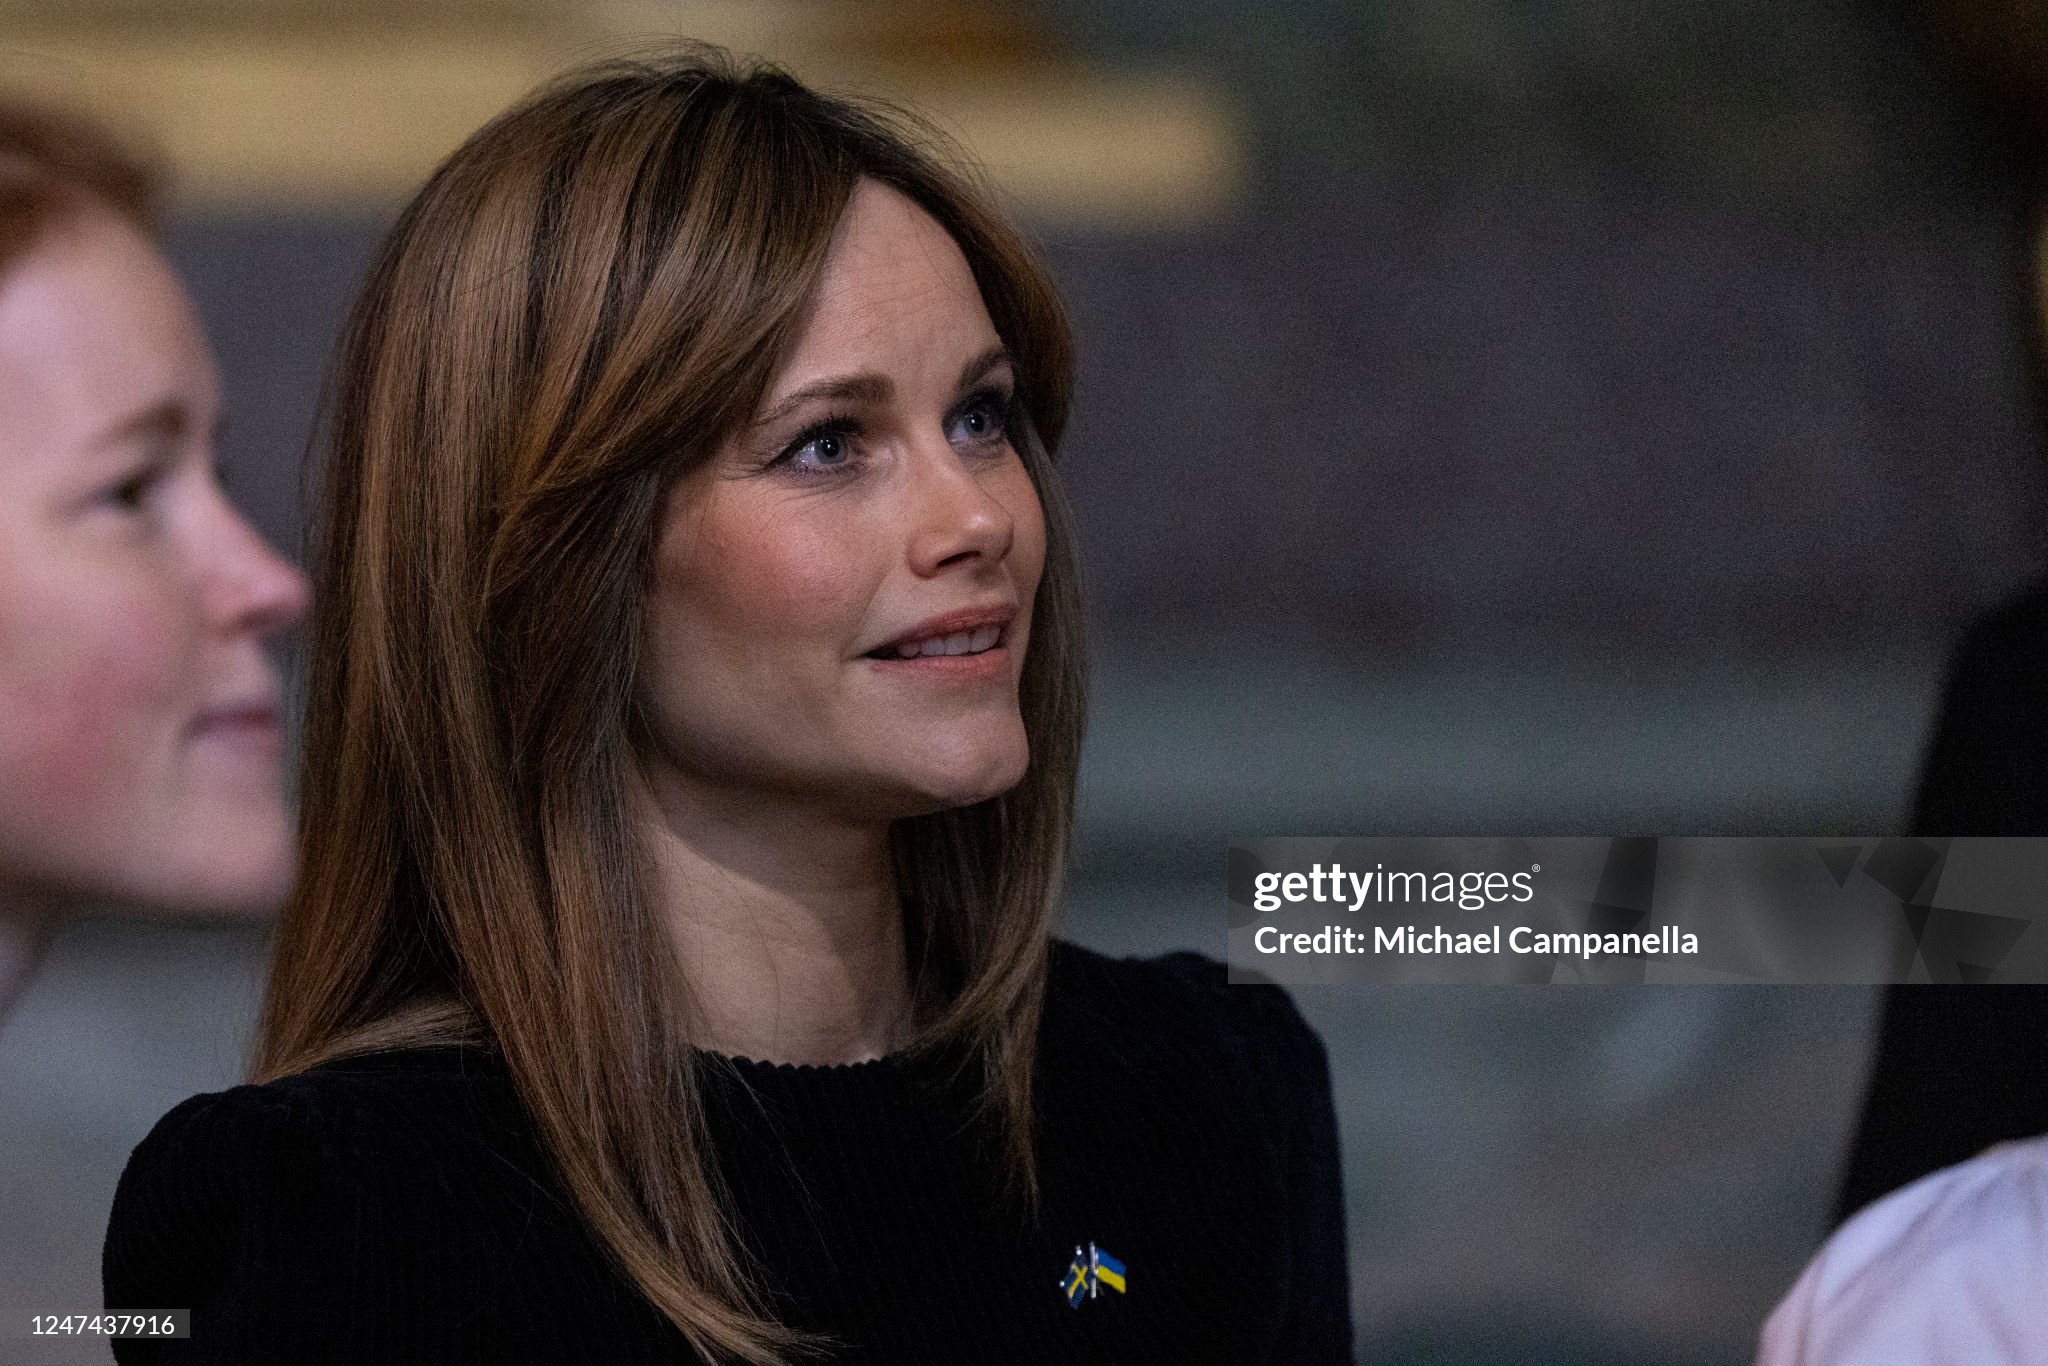 princess-sofia-of-sweden-attends-a-peace-prayer-marking-the-one-year-anniversary-since-the.jpg